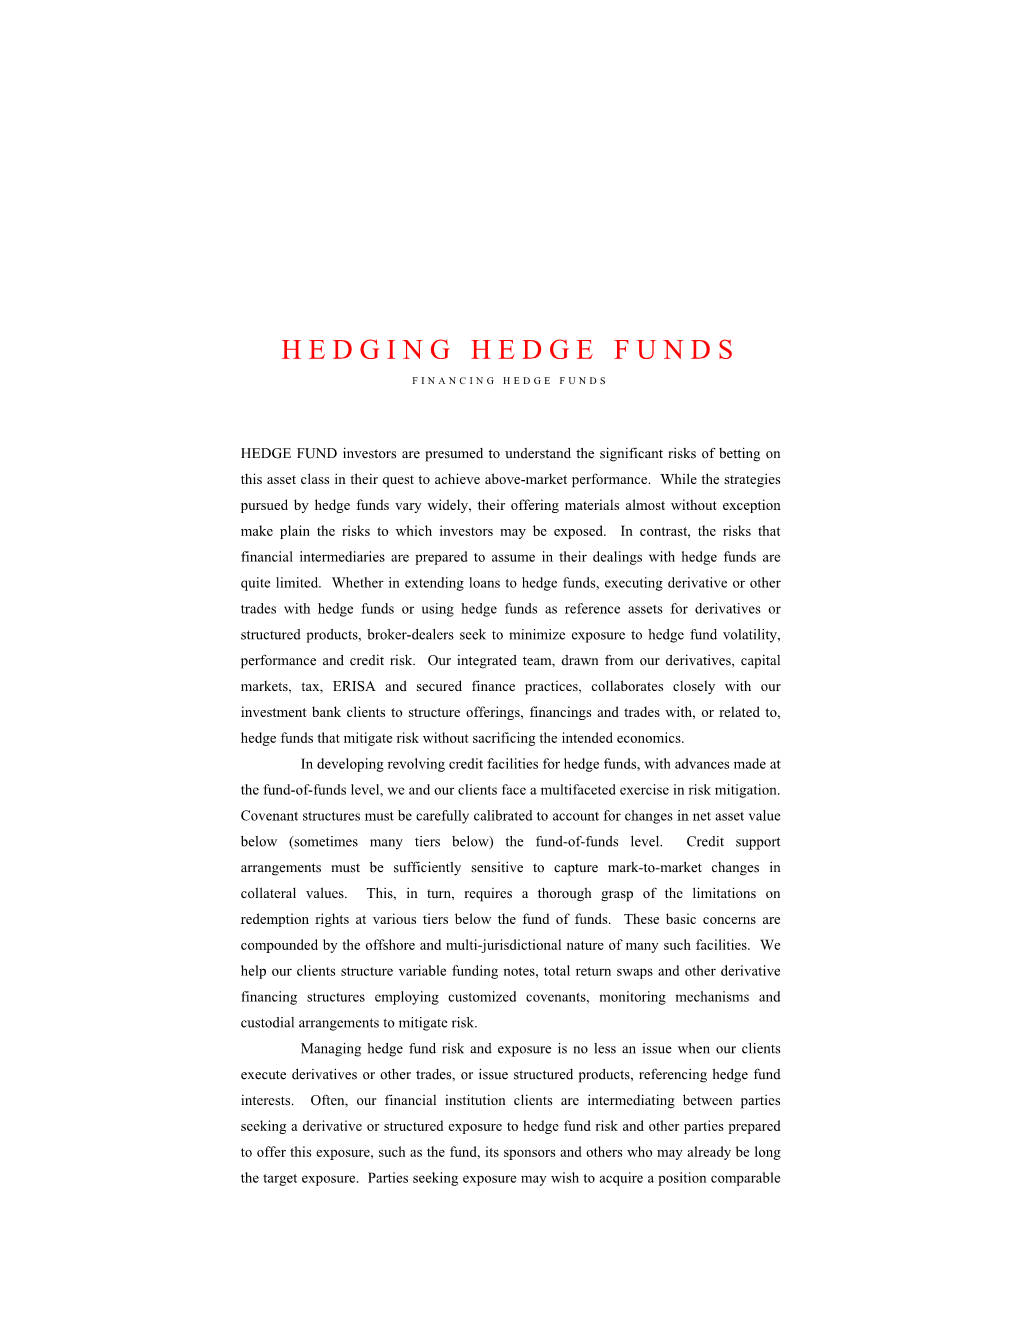 Hedging Hedge Funds